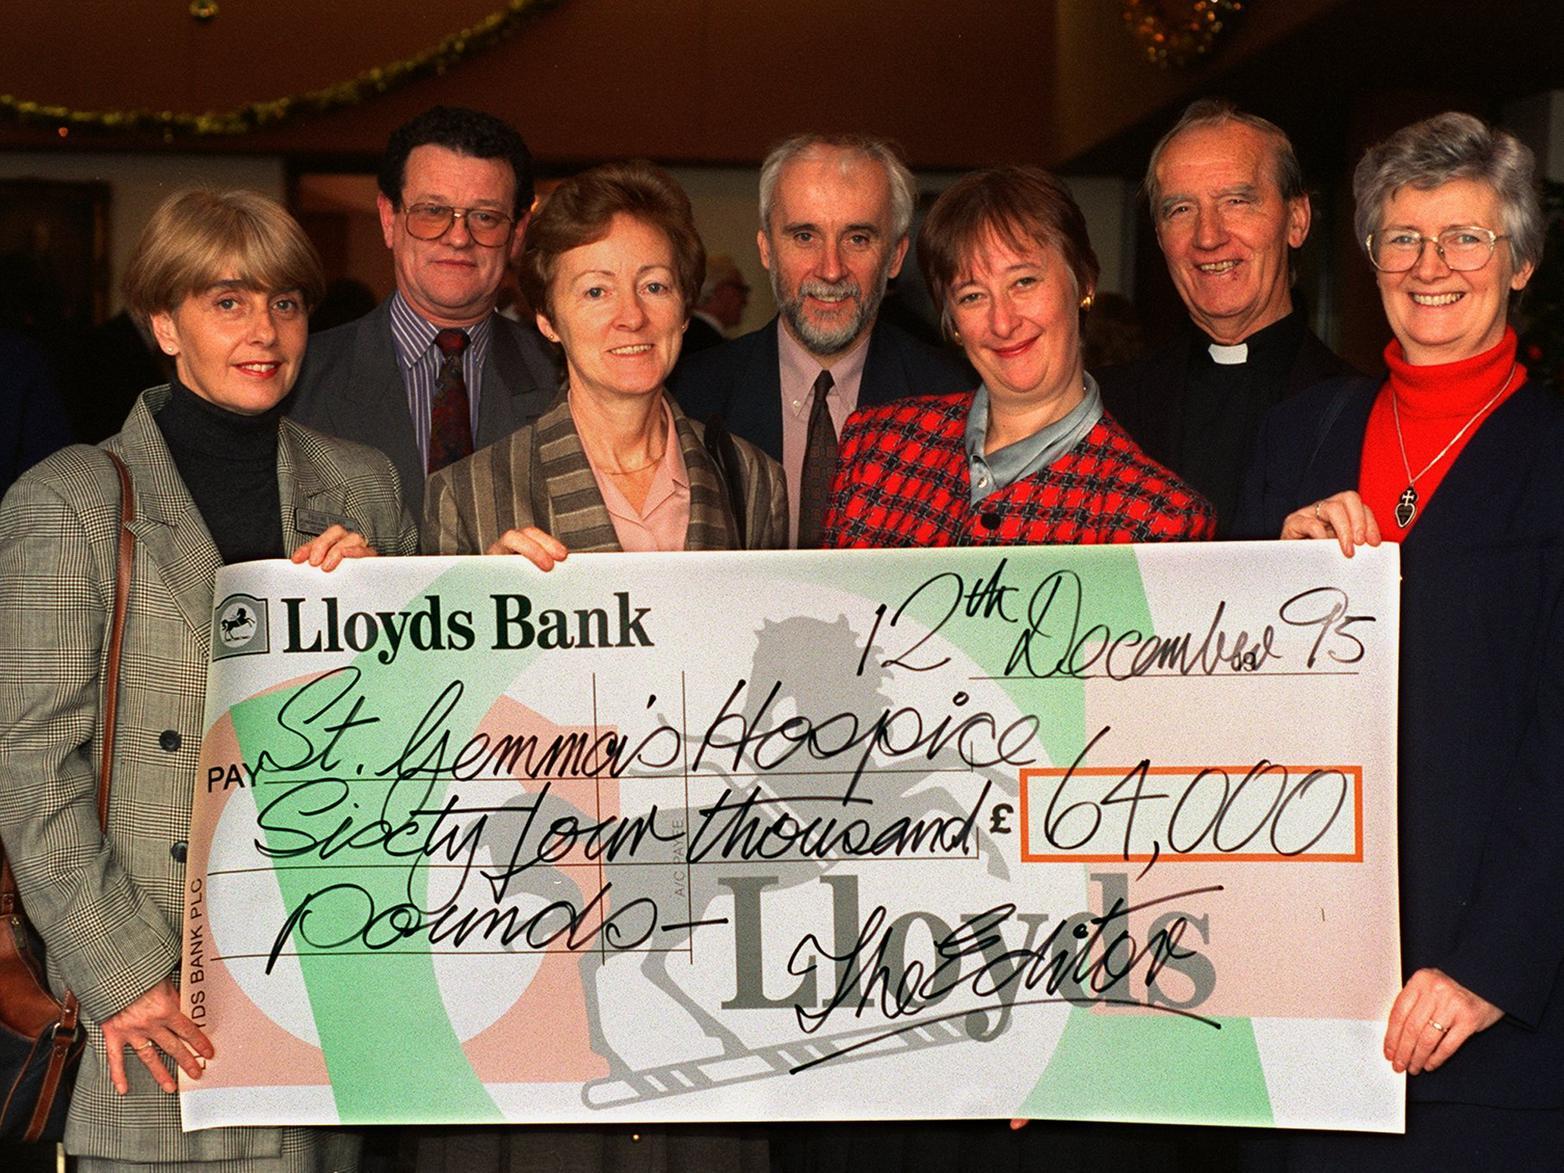 St. Gemma's Hospice staff receive a cheque donated by YEP readers from the Half and Half Appeal. Pictured, left to right, are Pauline Storey, Derek Edwards, Sheila Kelly, Con Egan, Elizabeth Houghton, Father Lyons, and Cecilia Foley.